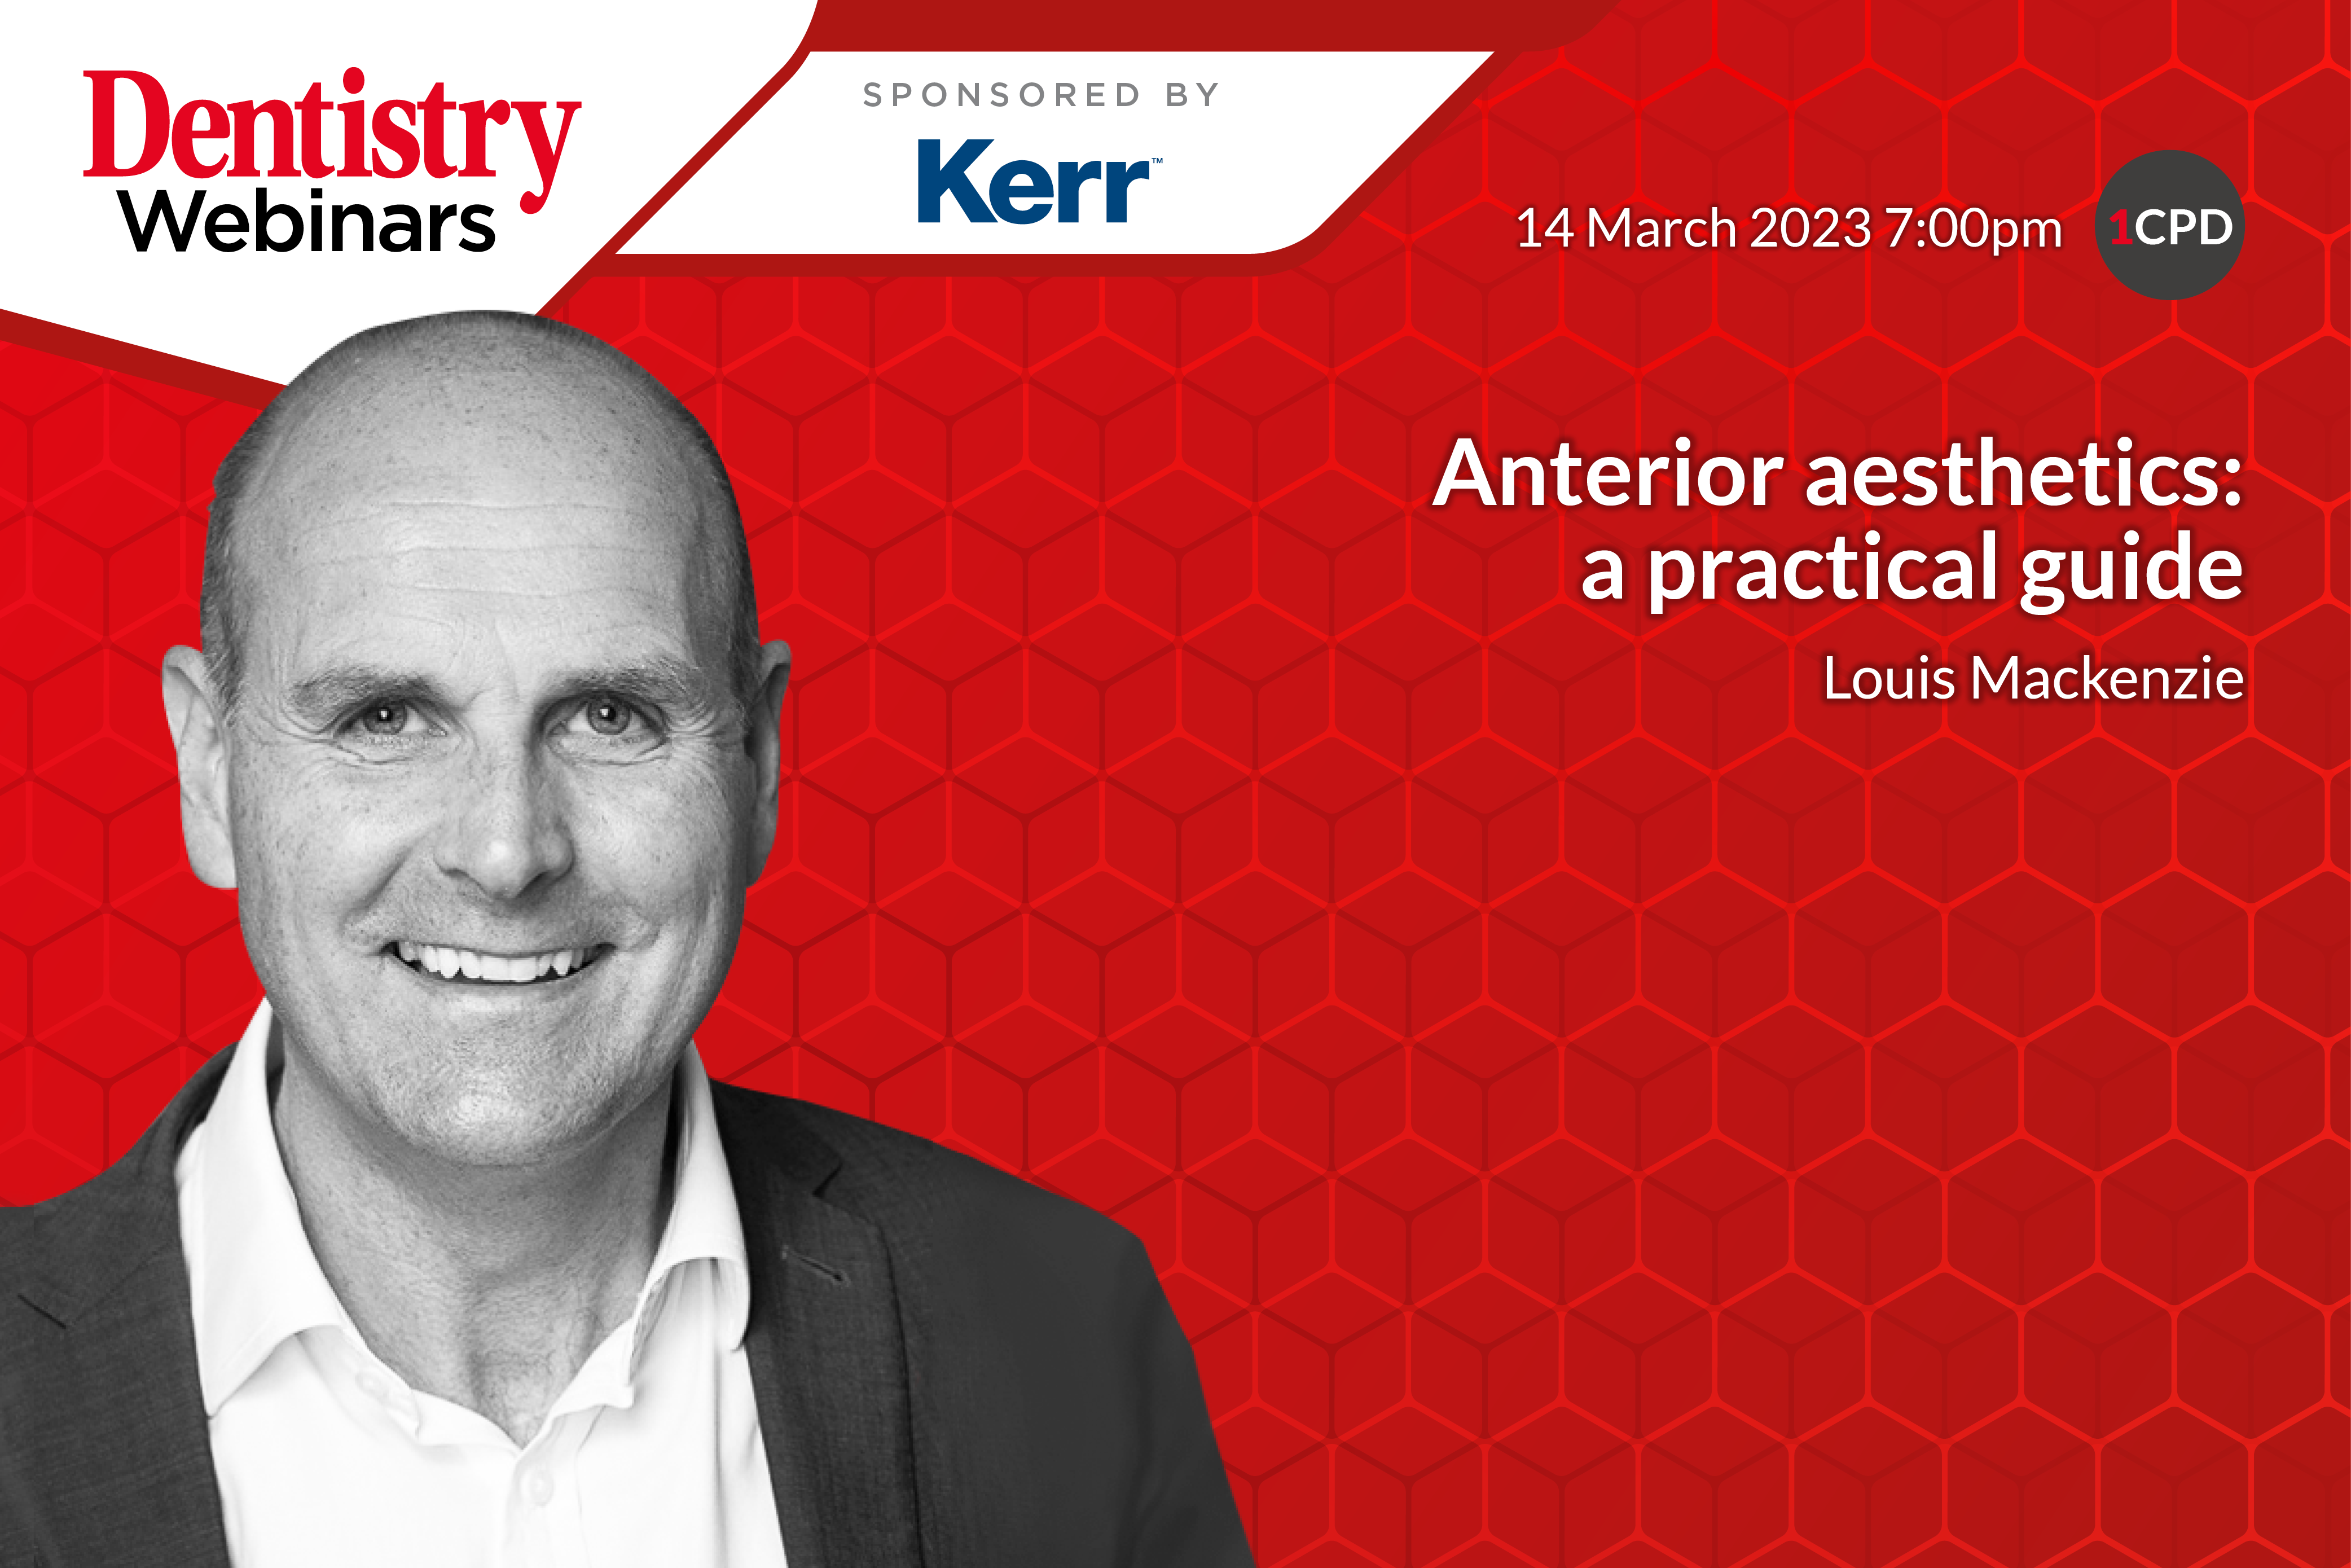 Join Louis Mackenzie on Tuesday 14 March 2023 at 7pm as he discusses a practical guide for anterior aesthetics.